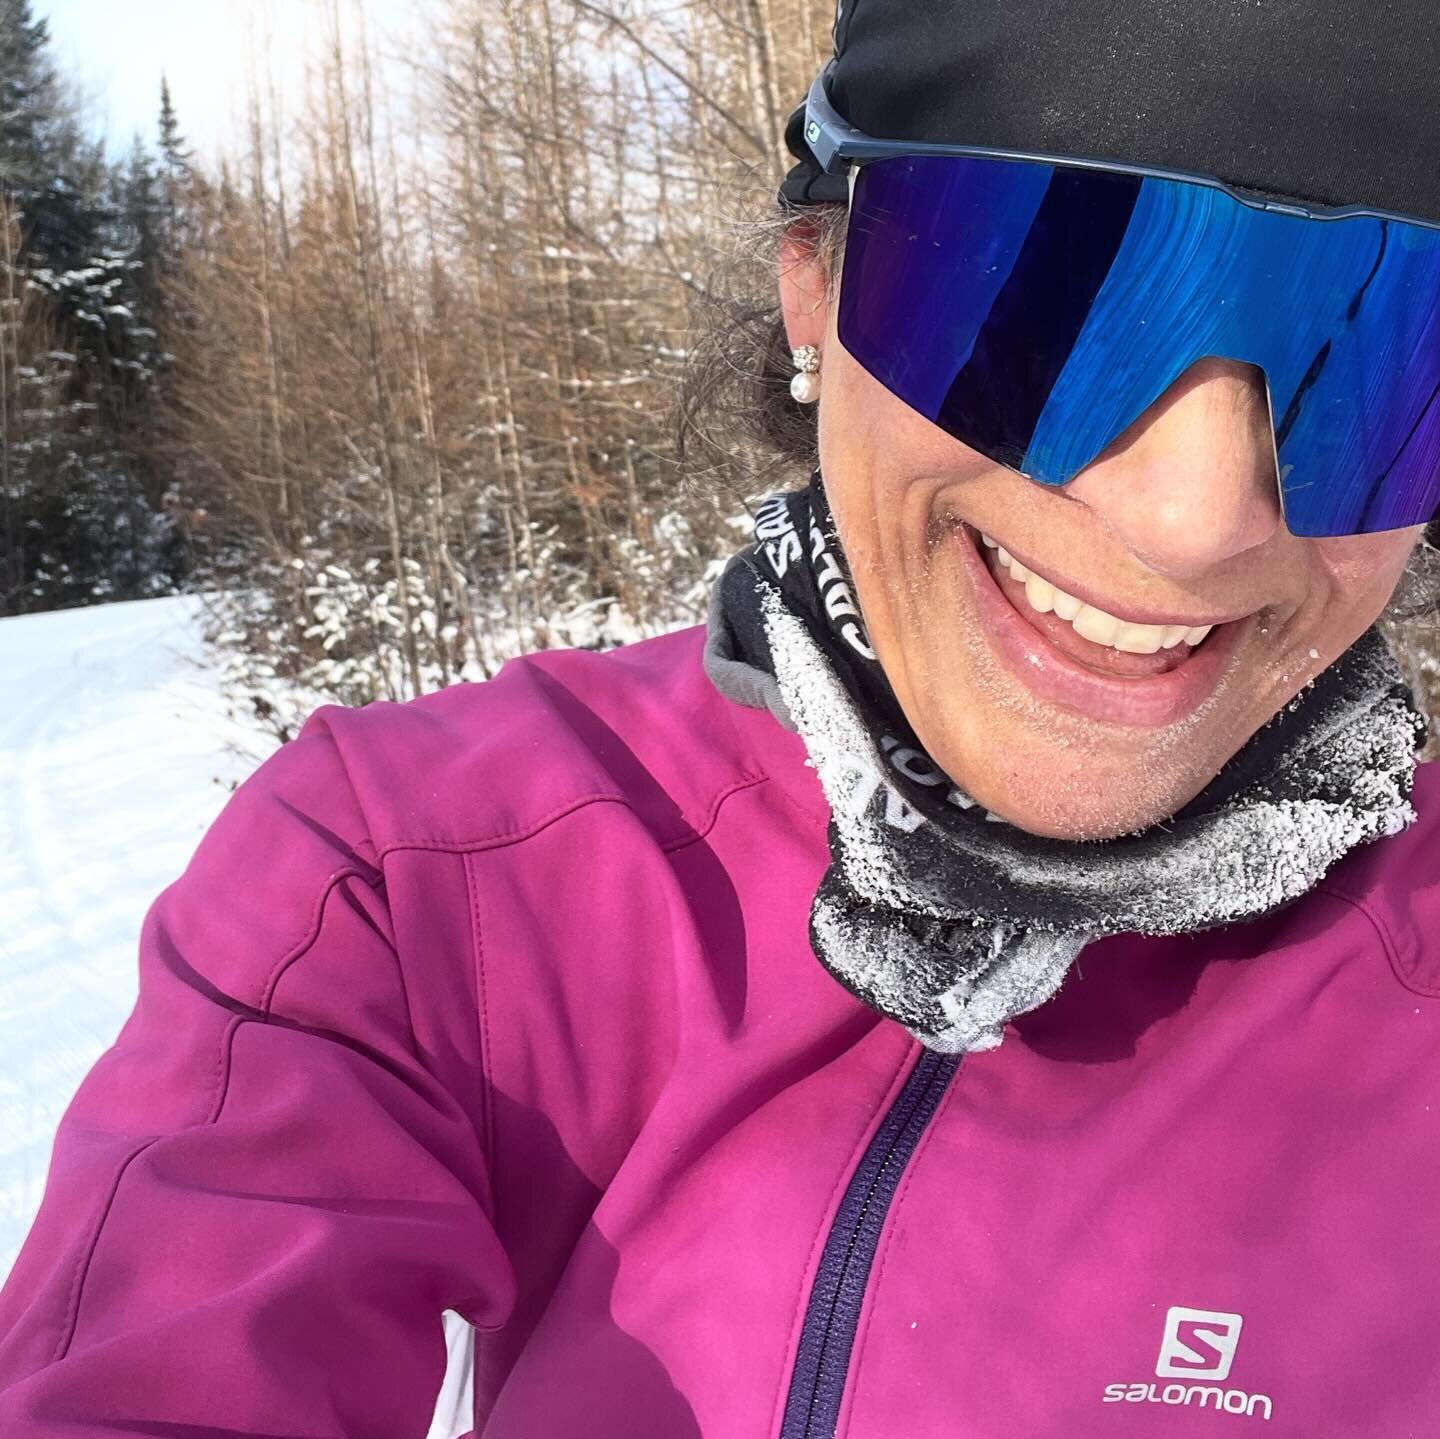 Skiing makes me happy 😃 ❄️ Chased the snow to the Laurentians. Hoping we get some closer to home again soon.
@salomonnordic 
@julbocanada 
#protectourwinters #fortheloveofskiing #nordicskiing #xcskiing #skilife #chasingsnow #skiinginthelaurentians #